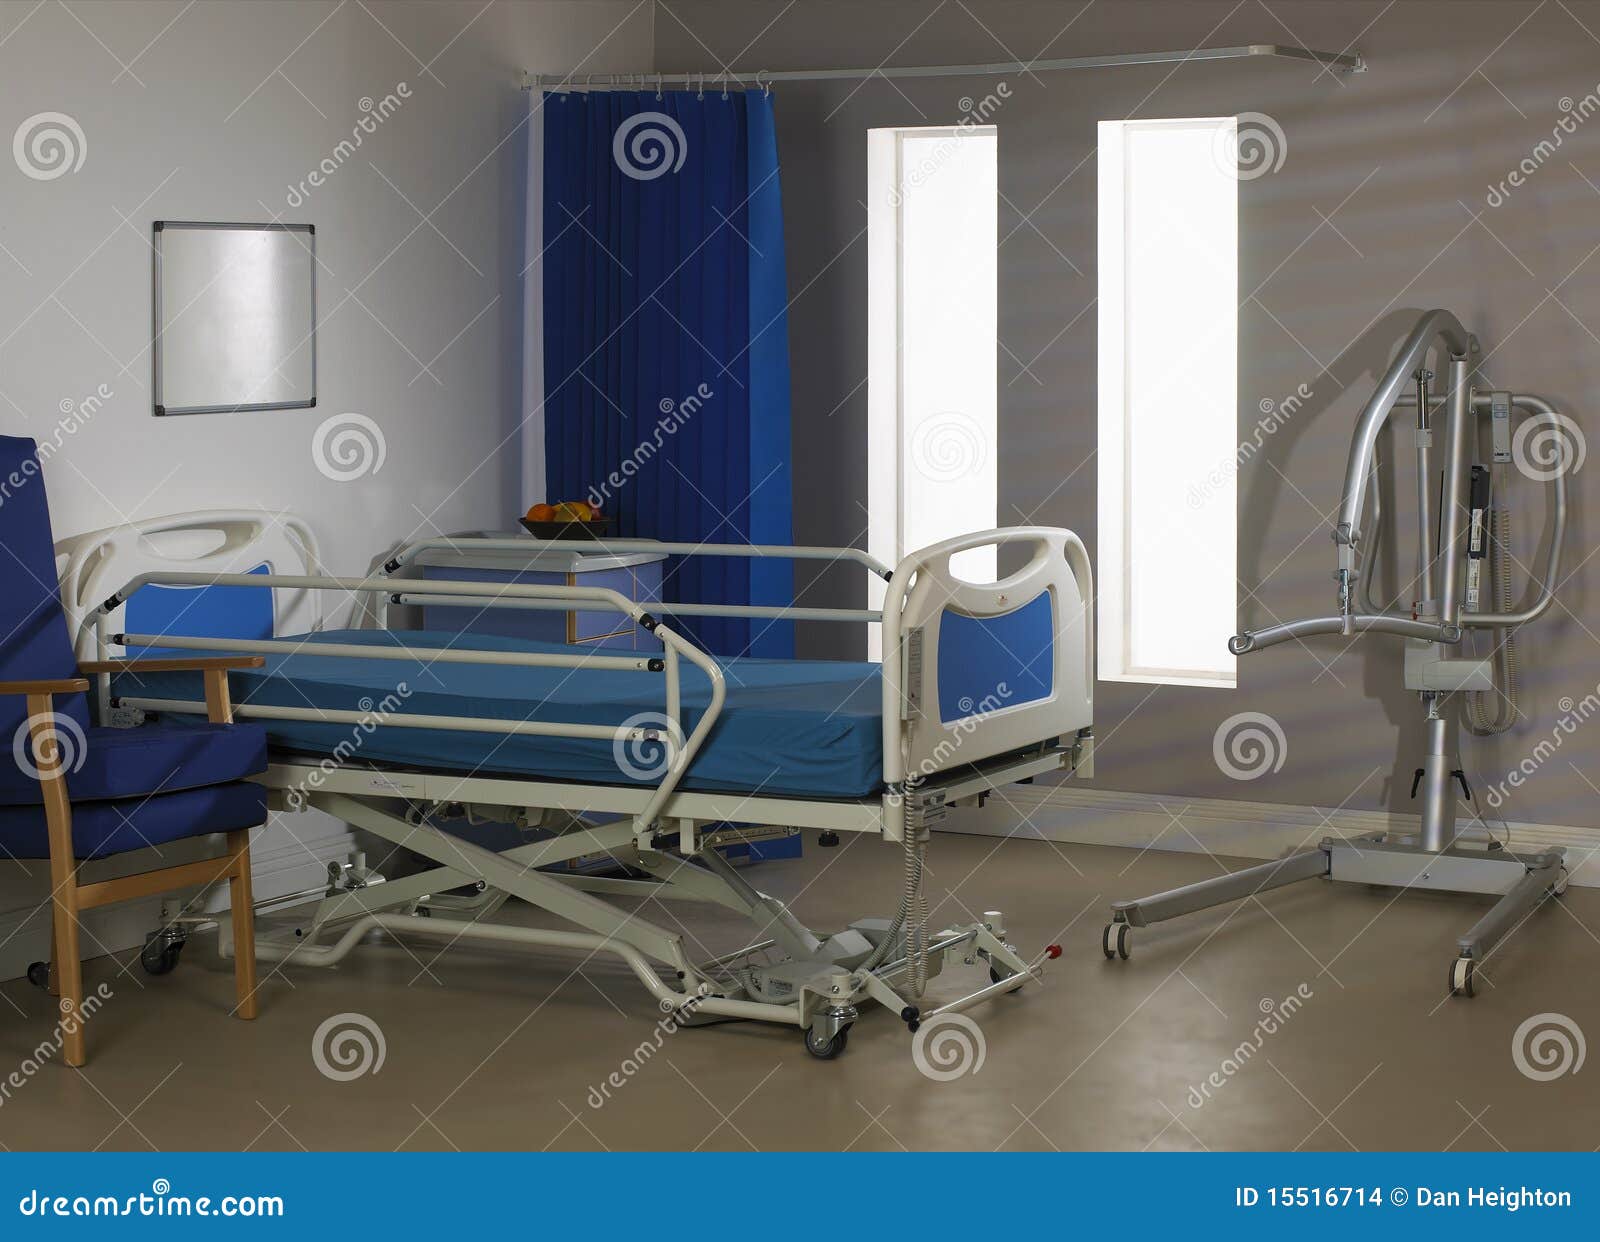 empty hospital ward with bed chair and hoist